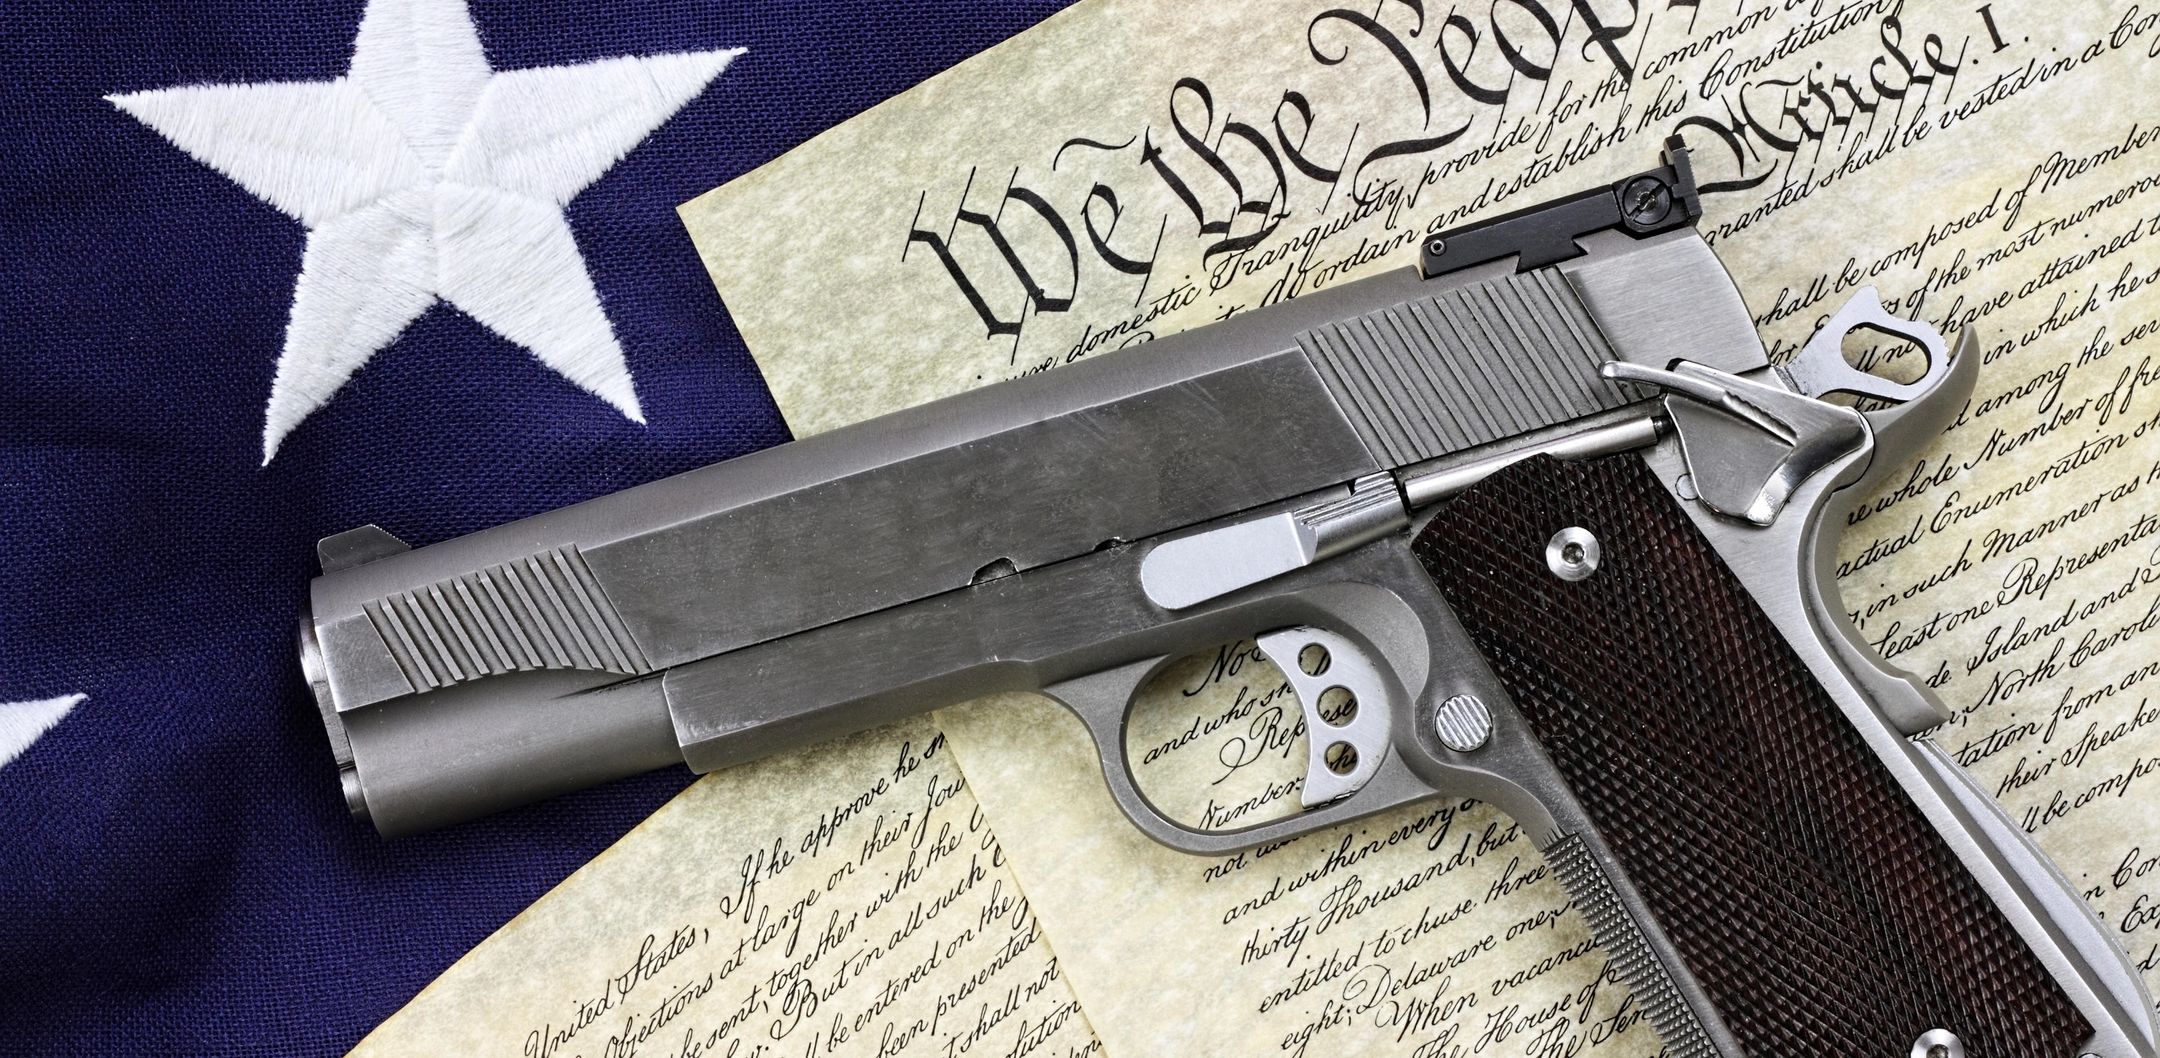 Conceal Carry Permit, Firearms Training, Safety Firearms Training, Concealed Handgun Permit